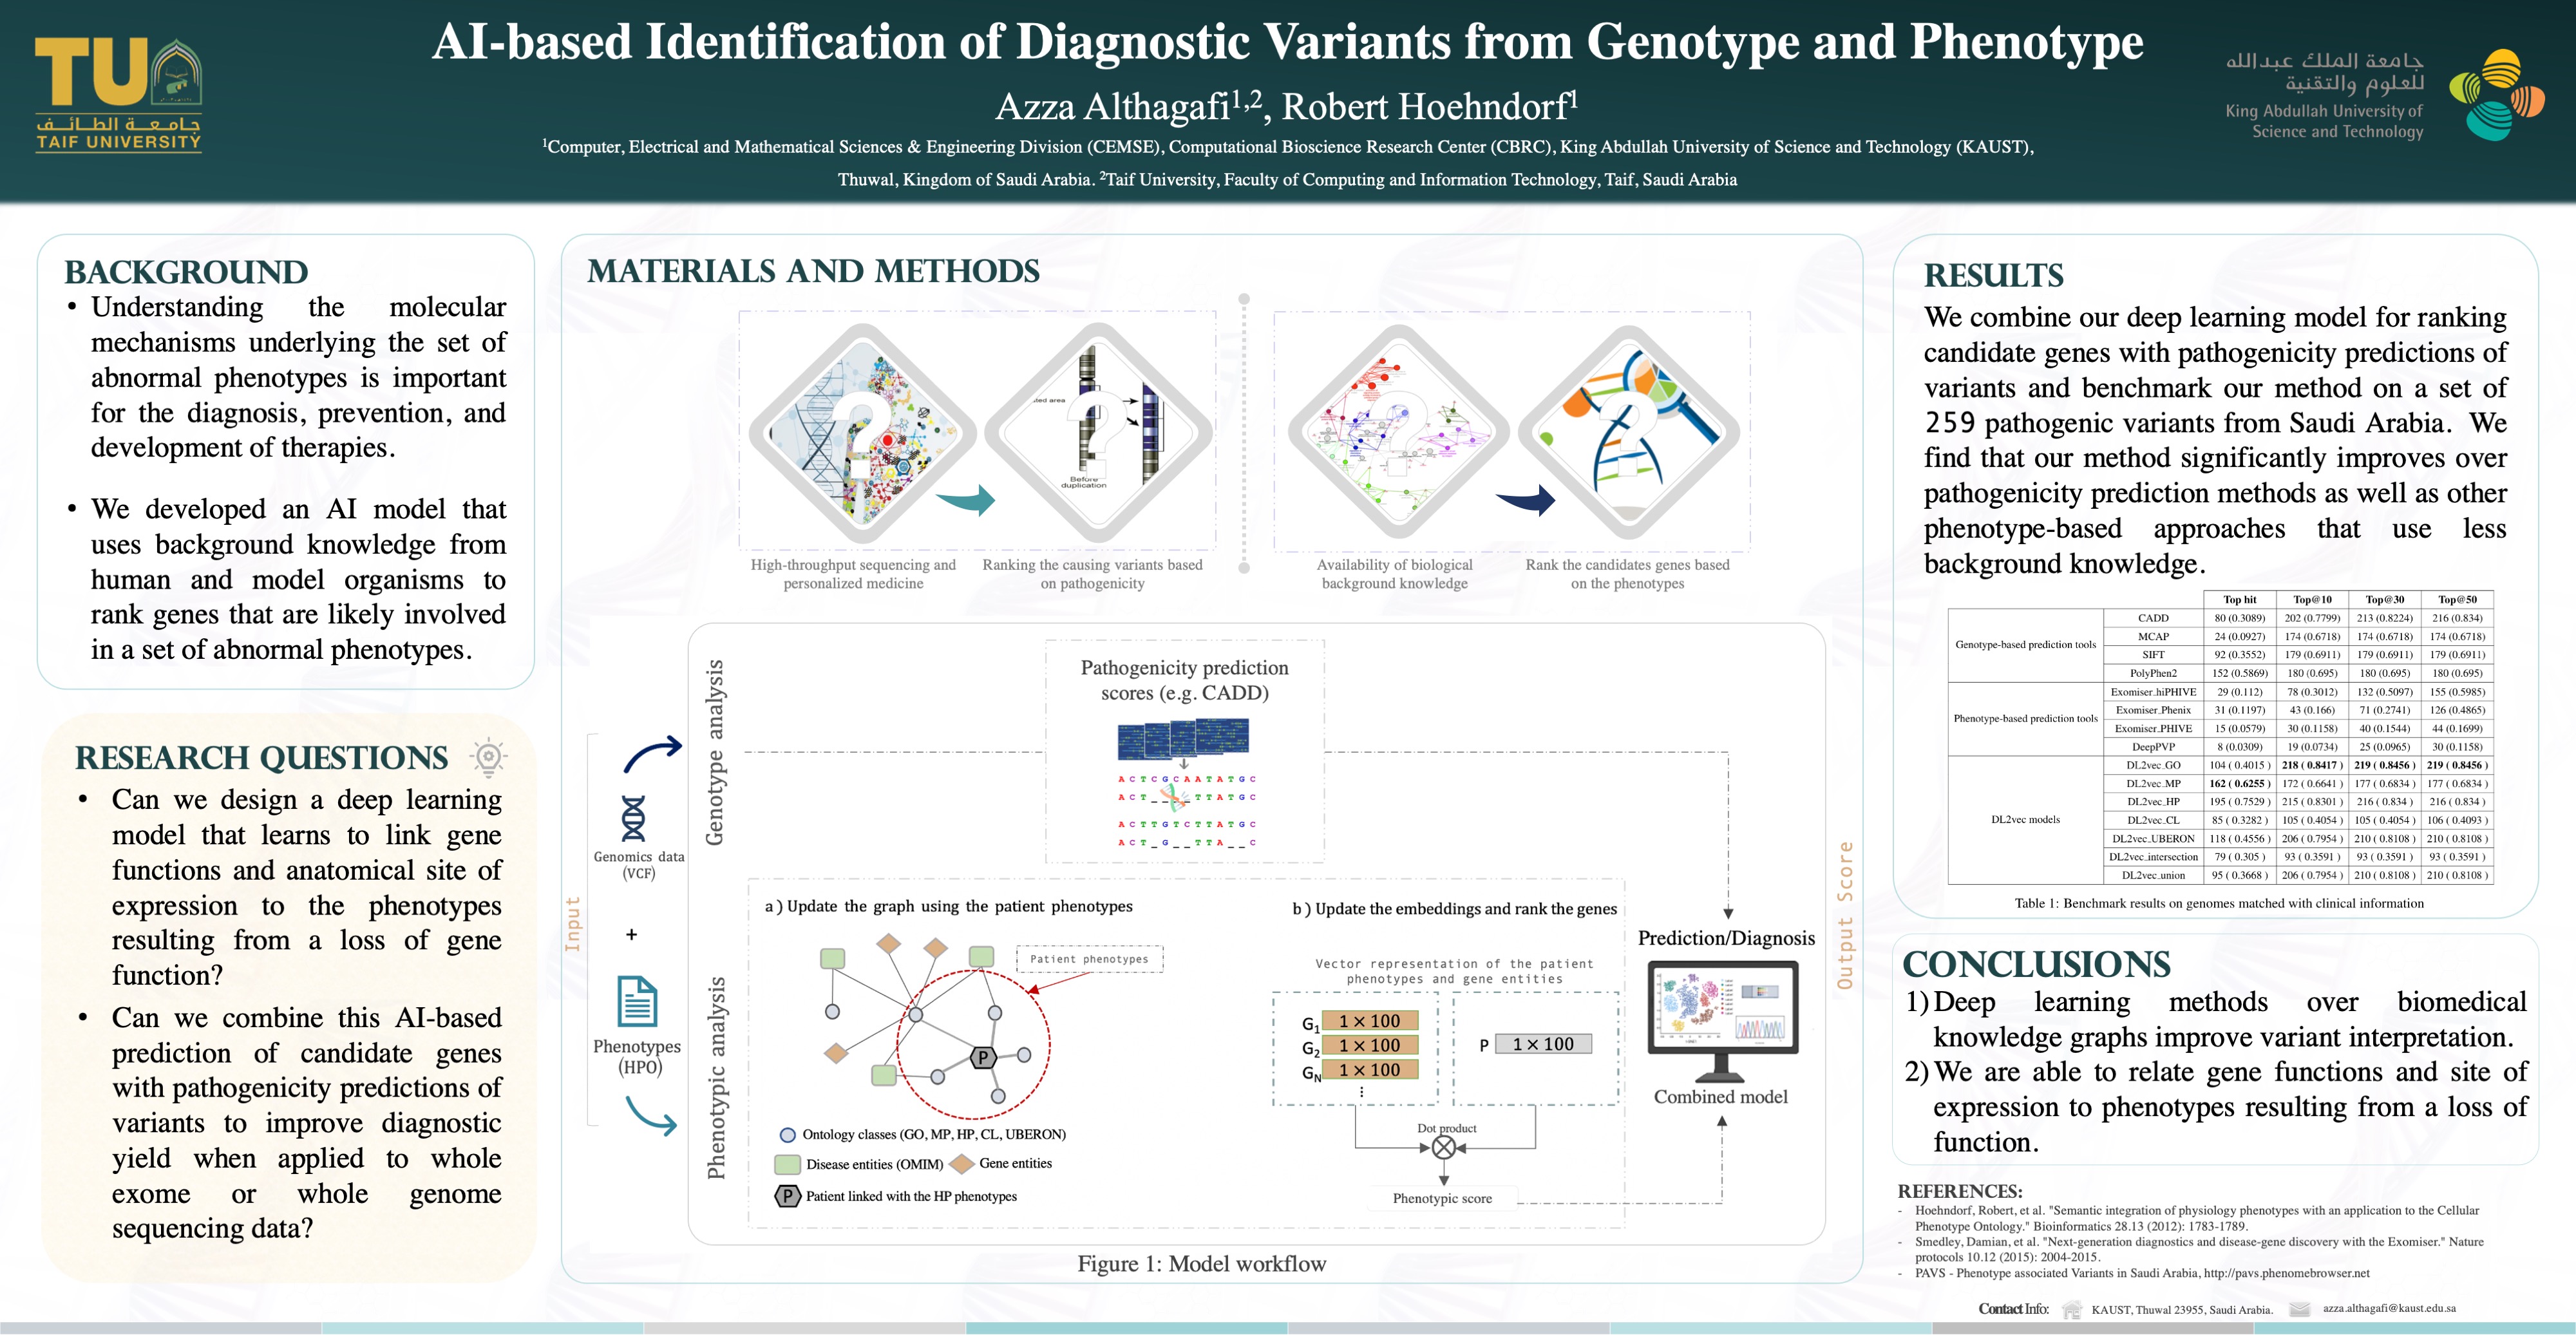 AI-based Identification of Diagnostic Variants from Genotype and Phenotype